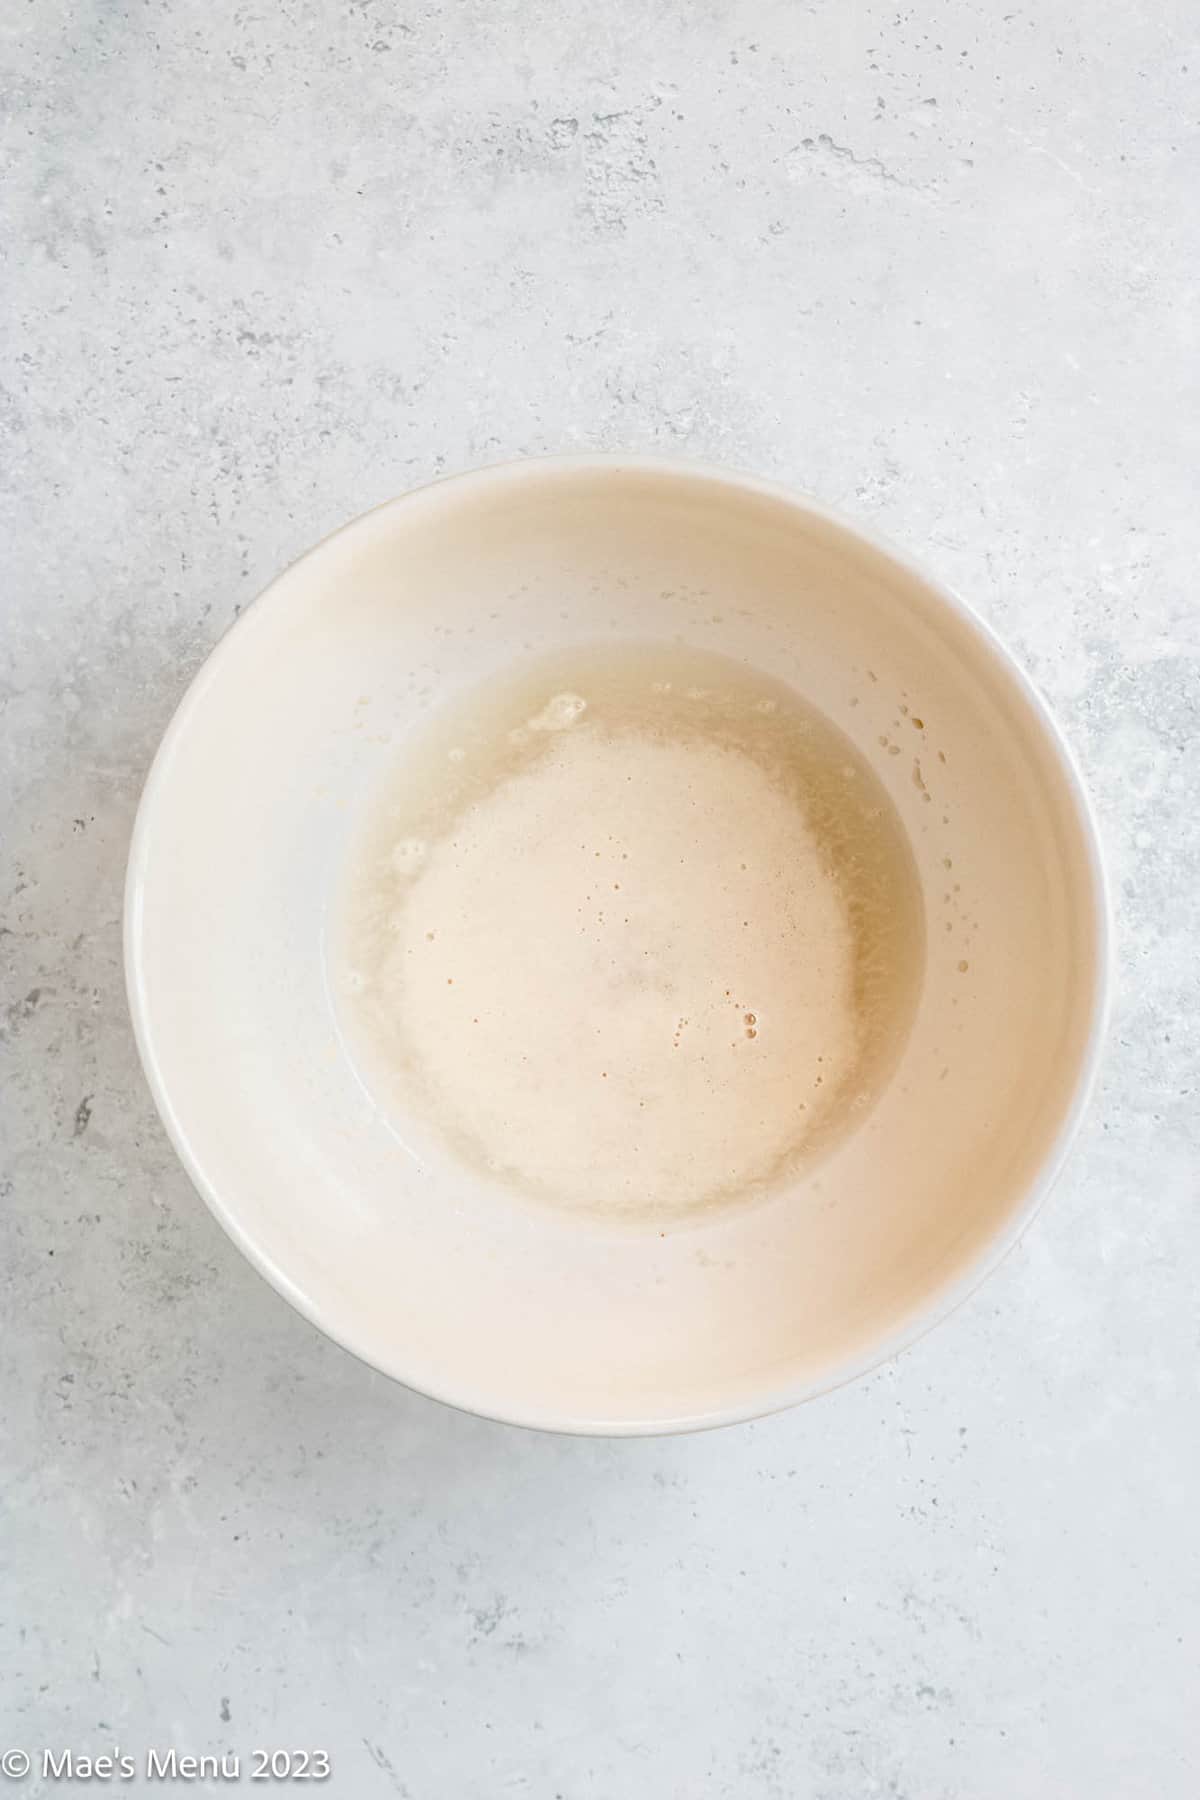 The yeast blooming in a mixing bowl with warm water.